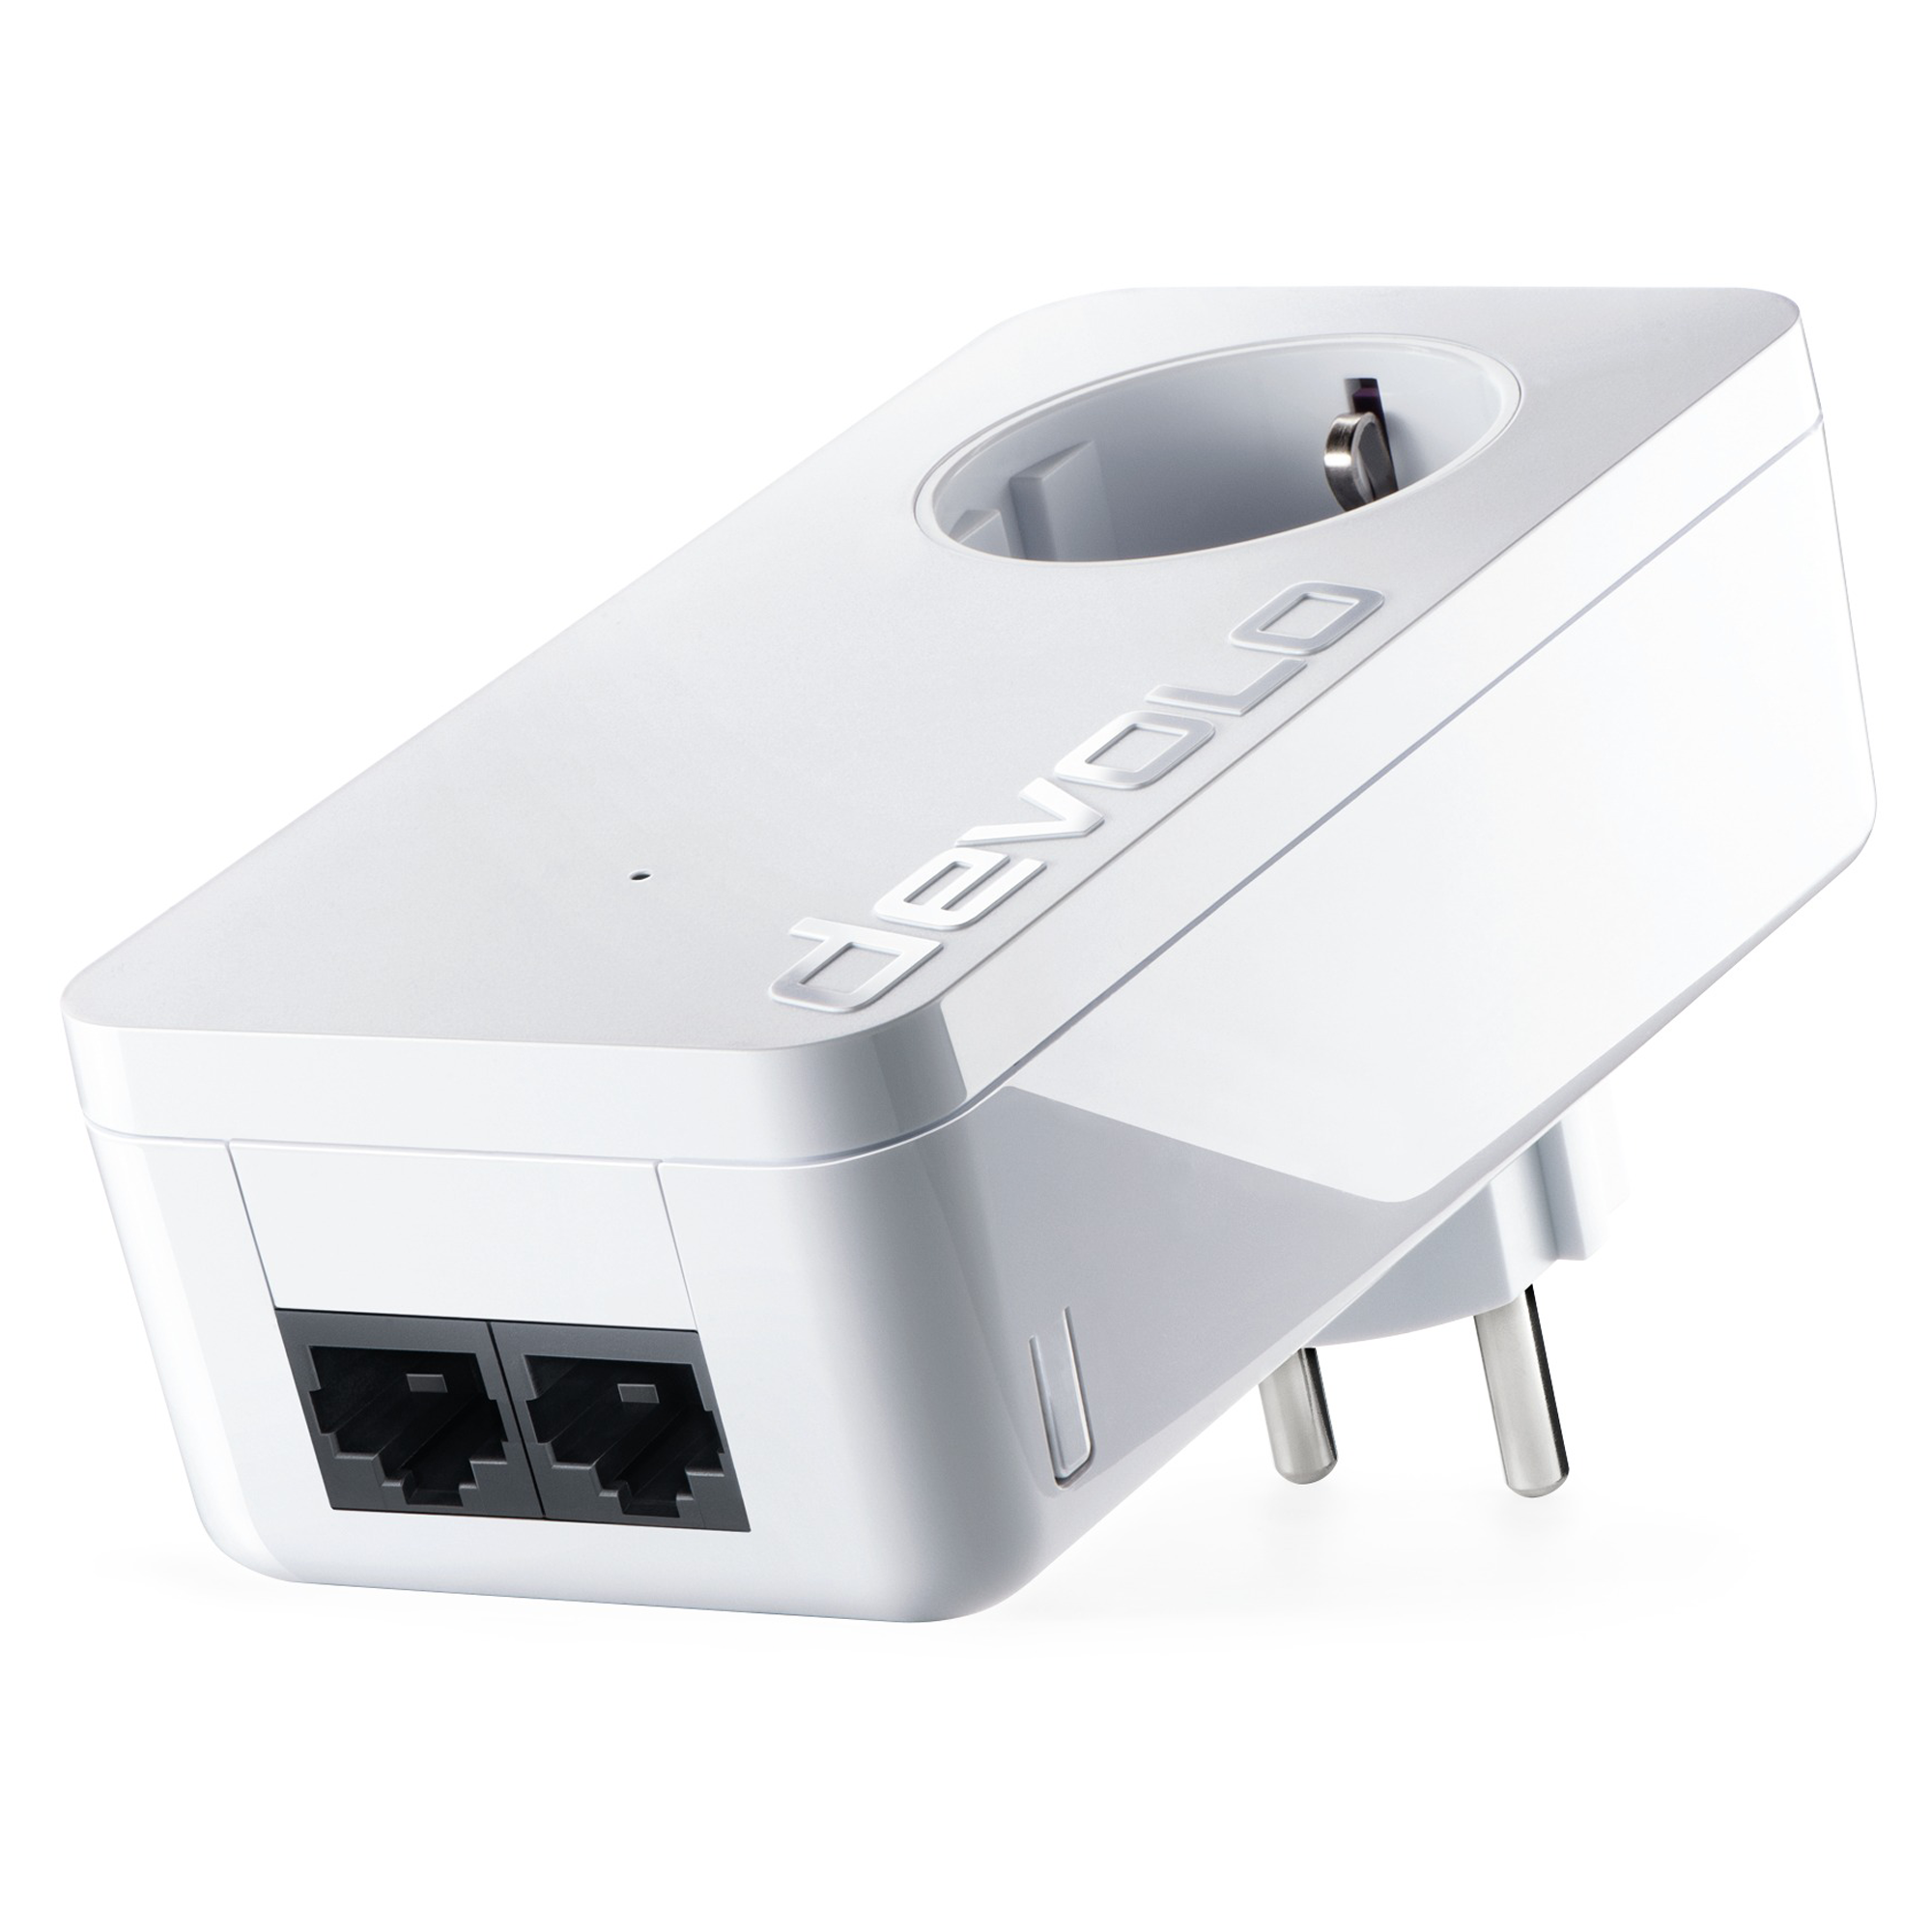 Powerline-Adapter dLAN 550 duo+ + product picture